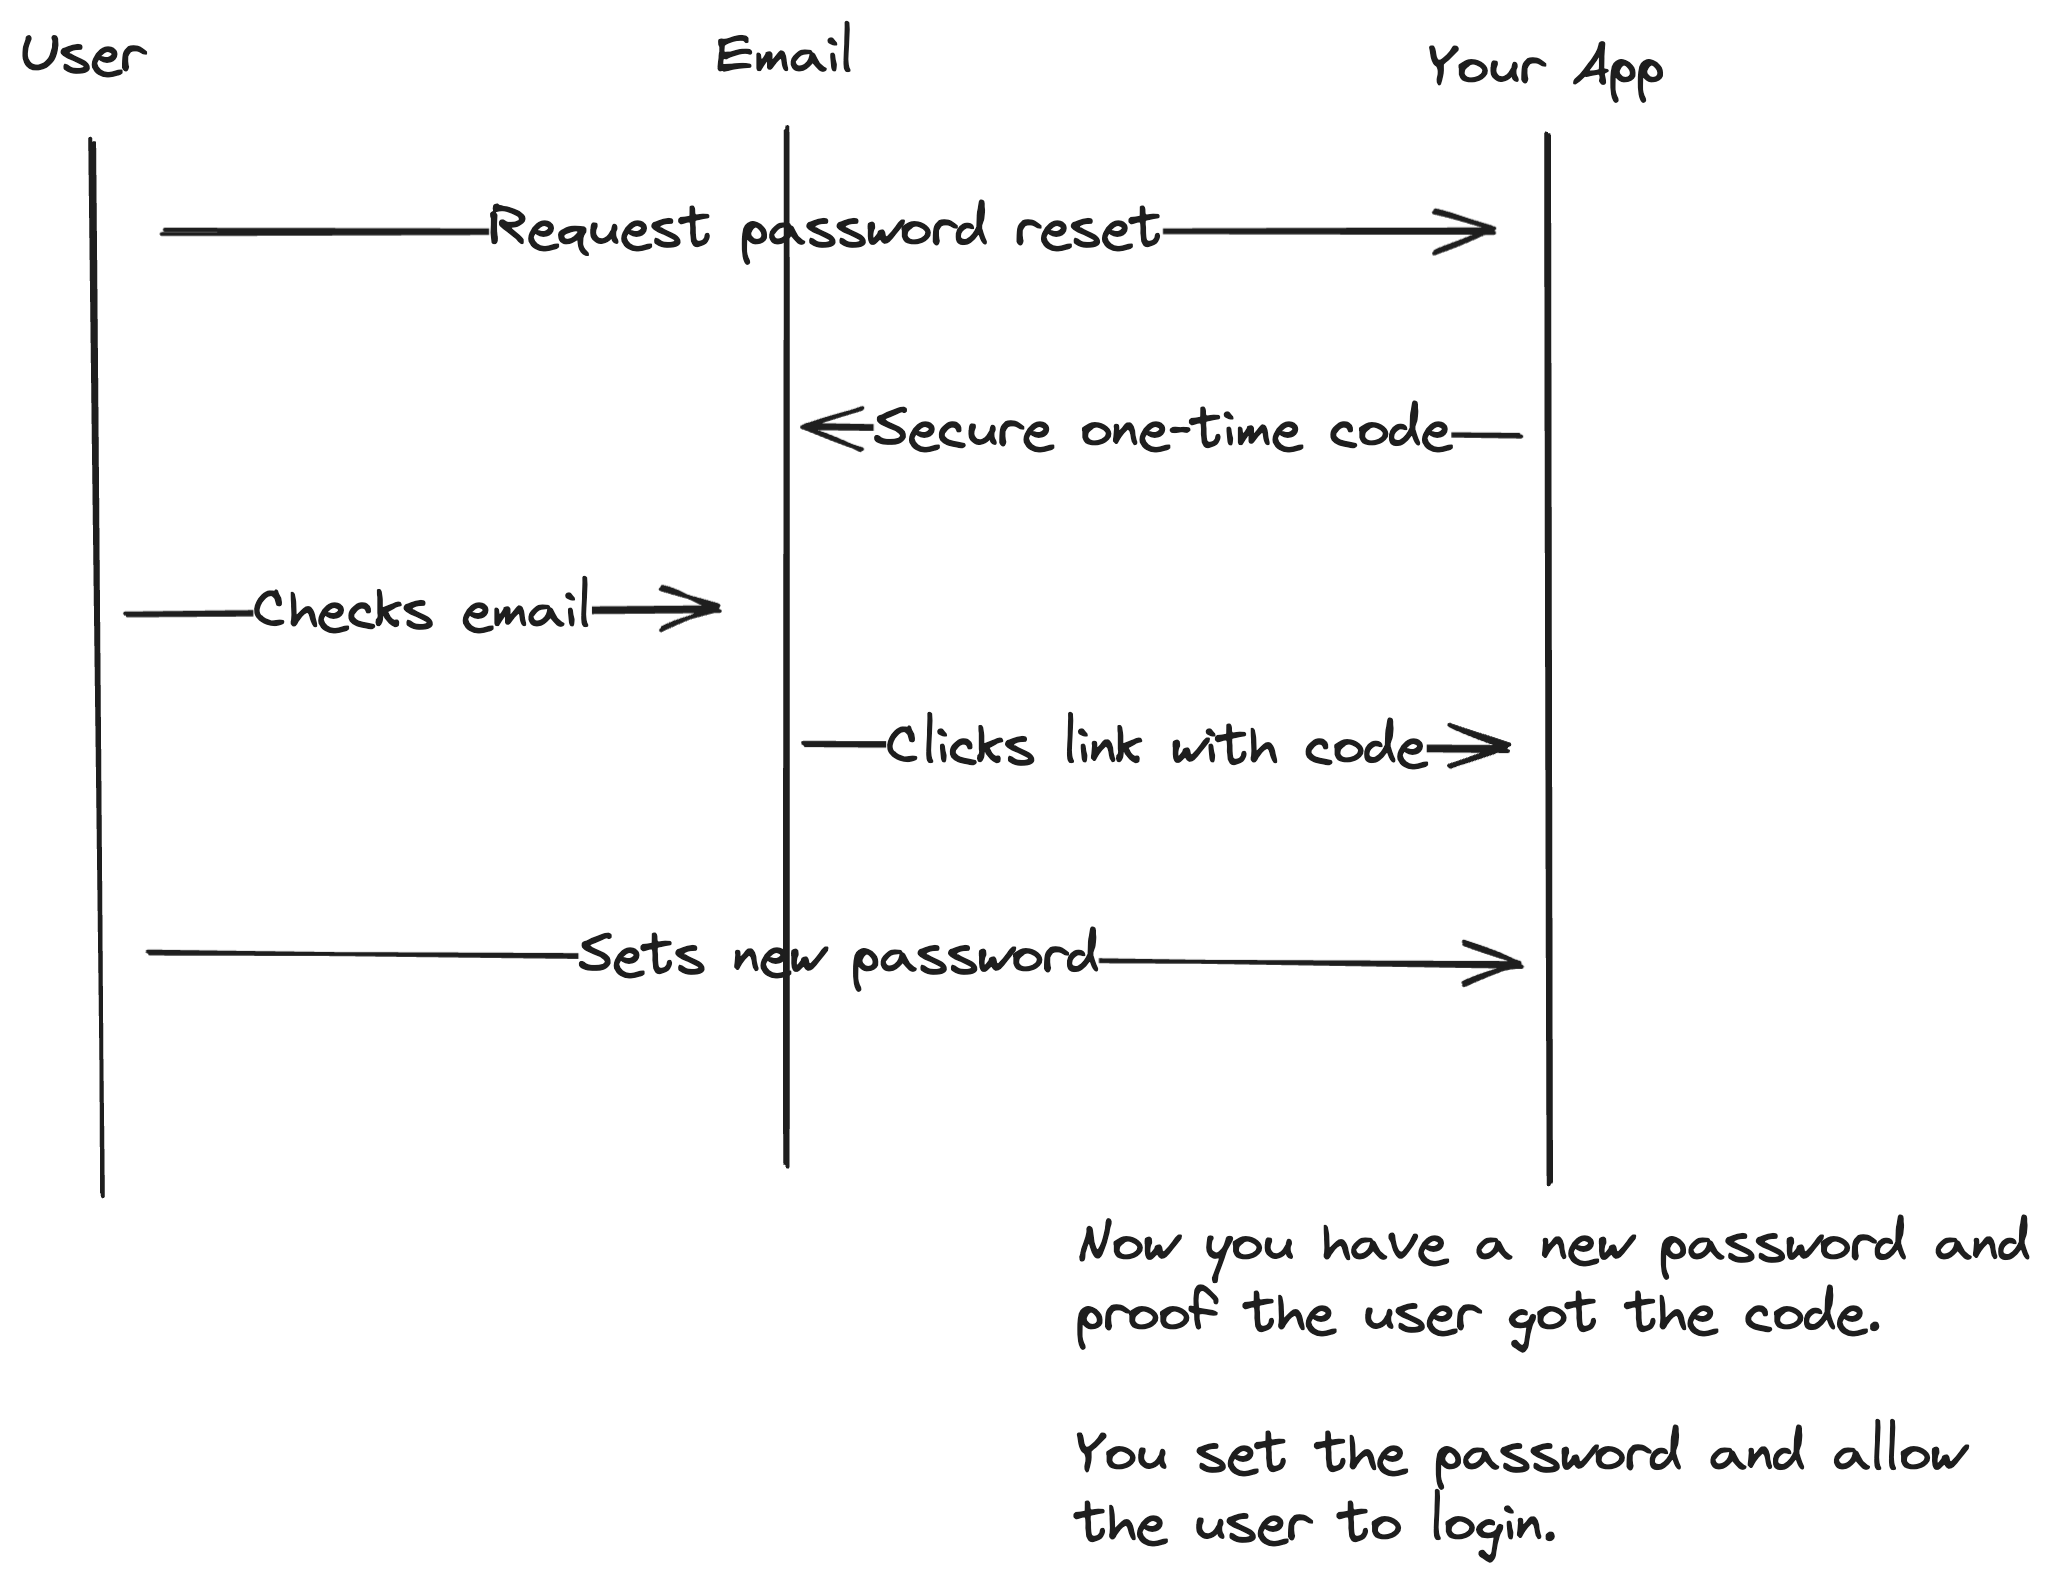 How to create a password reset flow for your app.